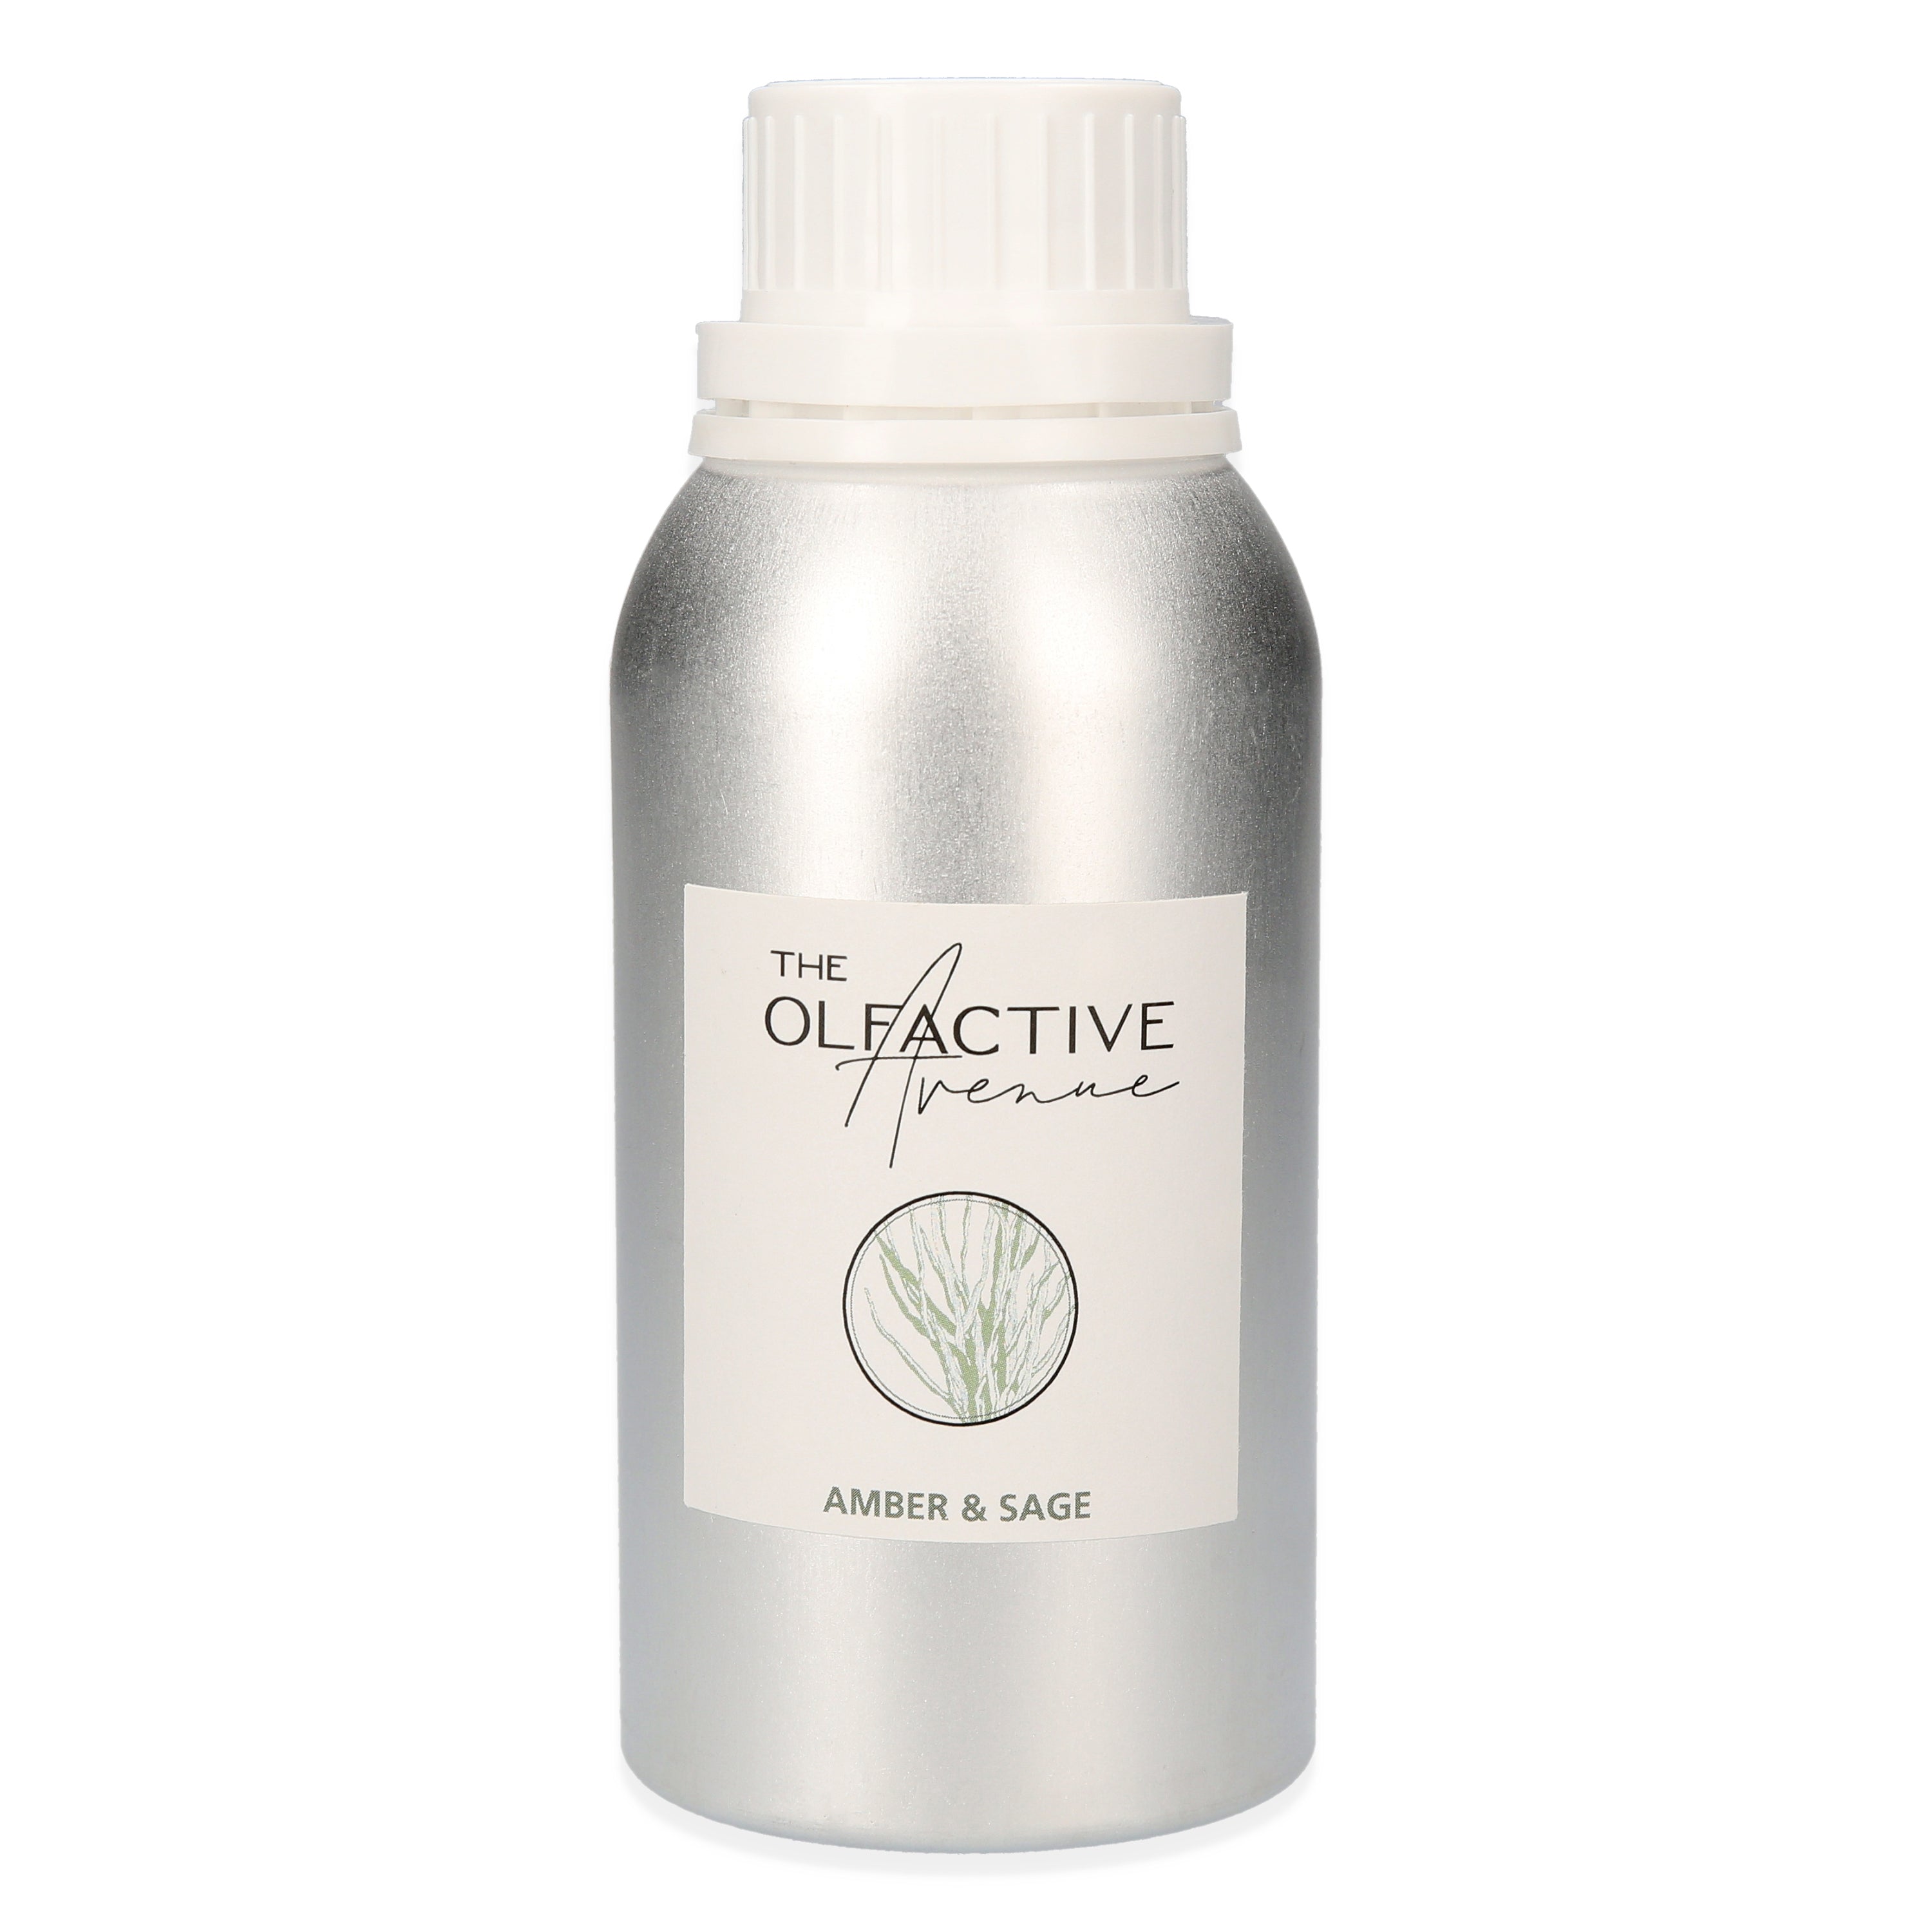 AMBER & SAGE REFILL - The Olfactive Avenue